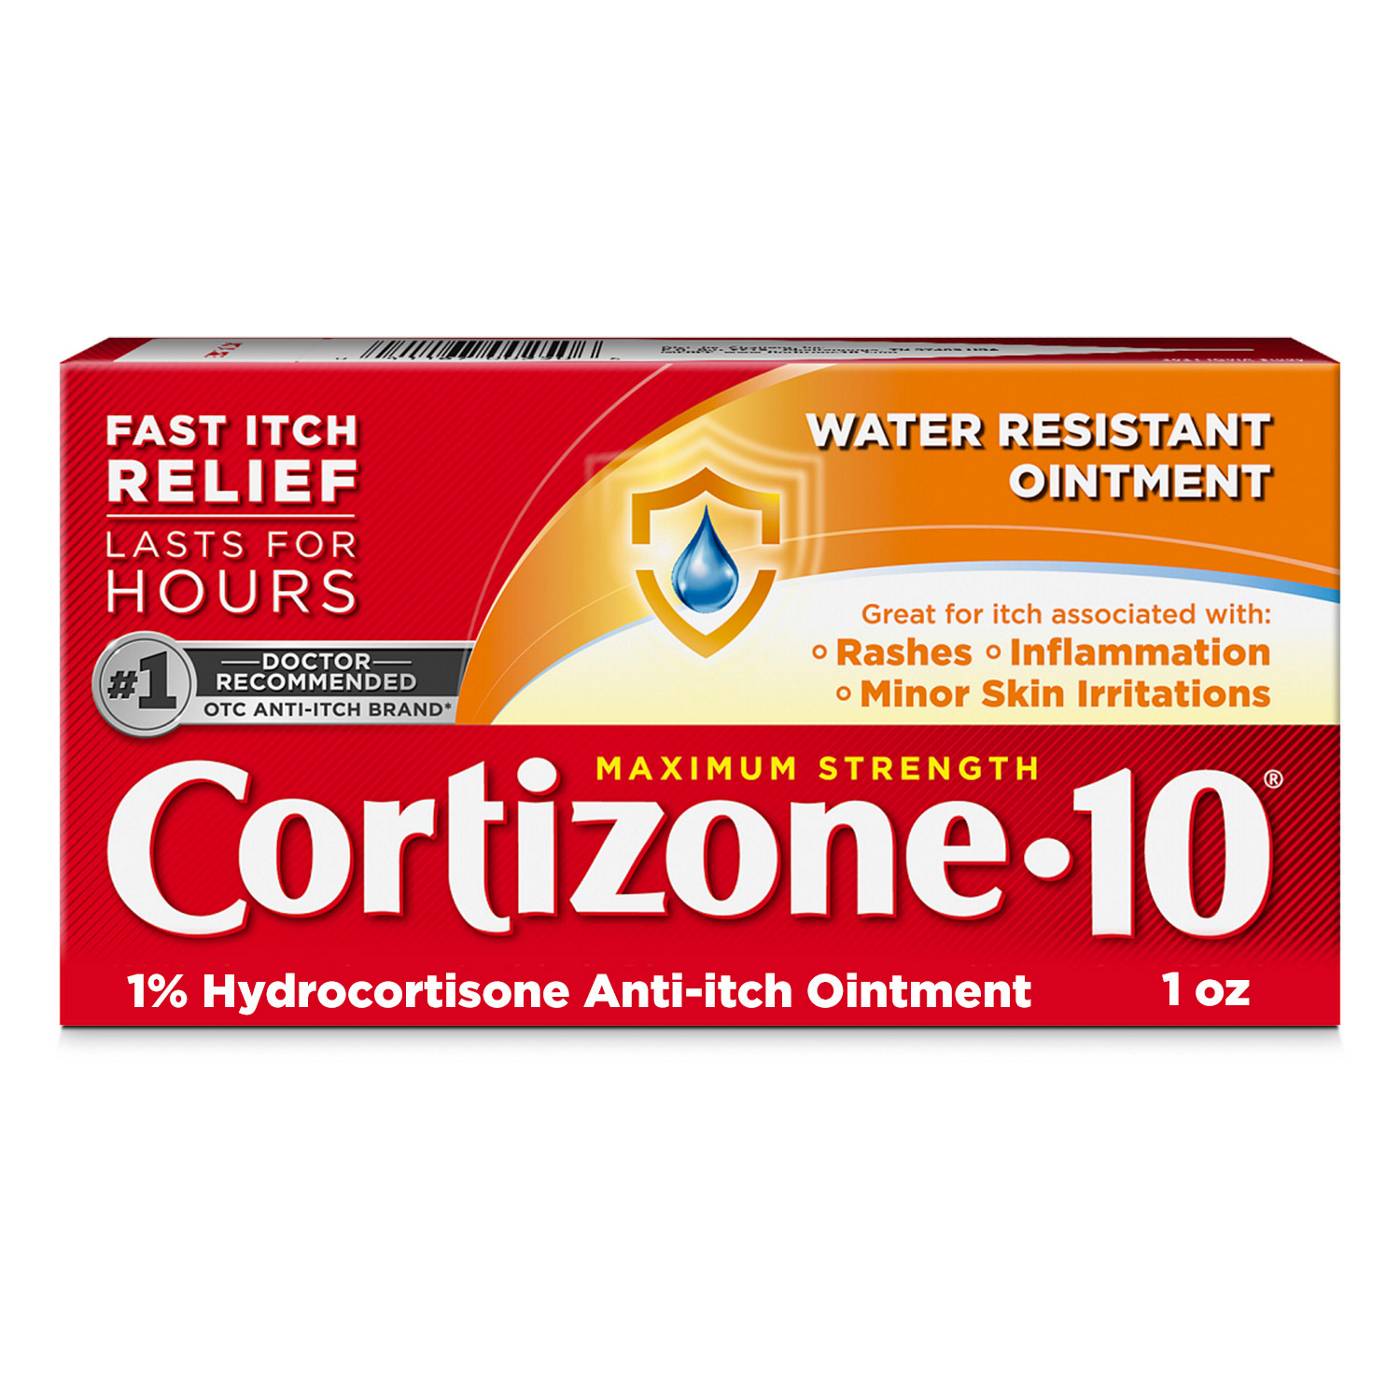 Cortizone 10 Water Resistant Anti-Itch Ointment; image 7 of 8